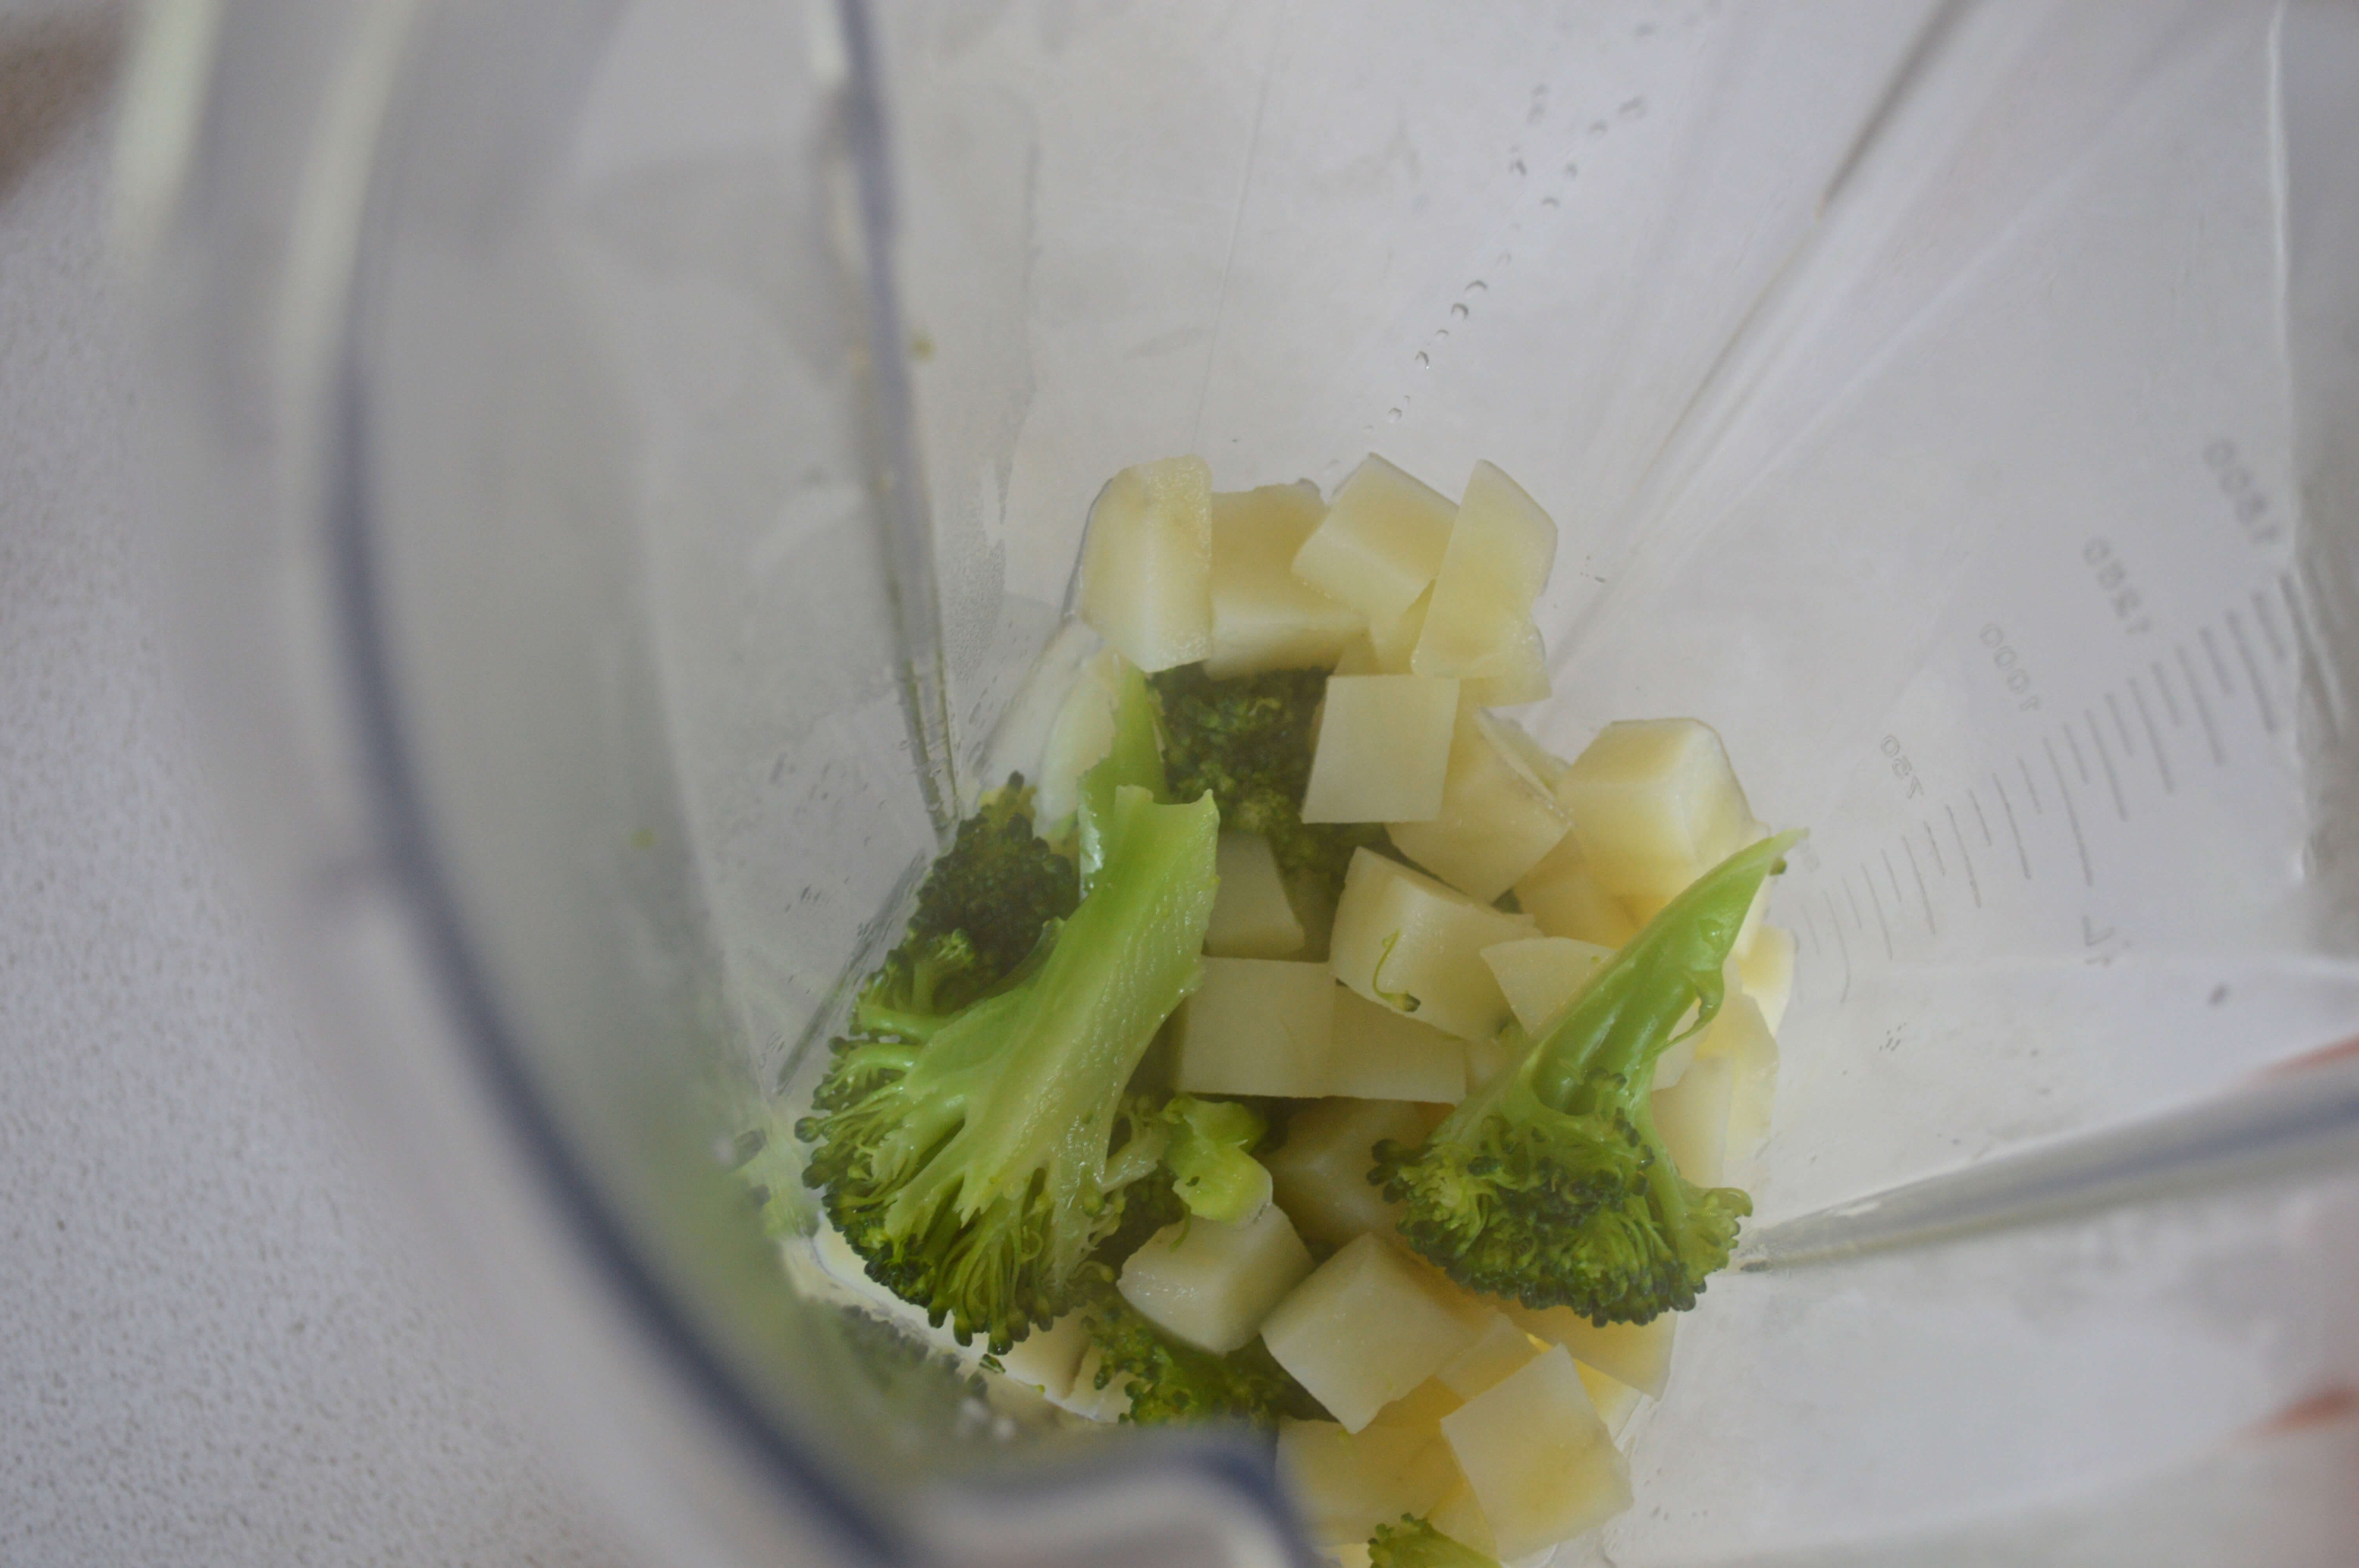 Diced carrot and broccoli in a blender